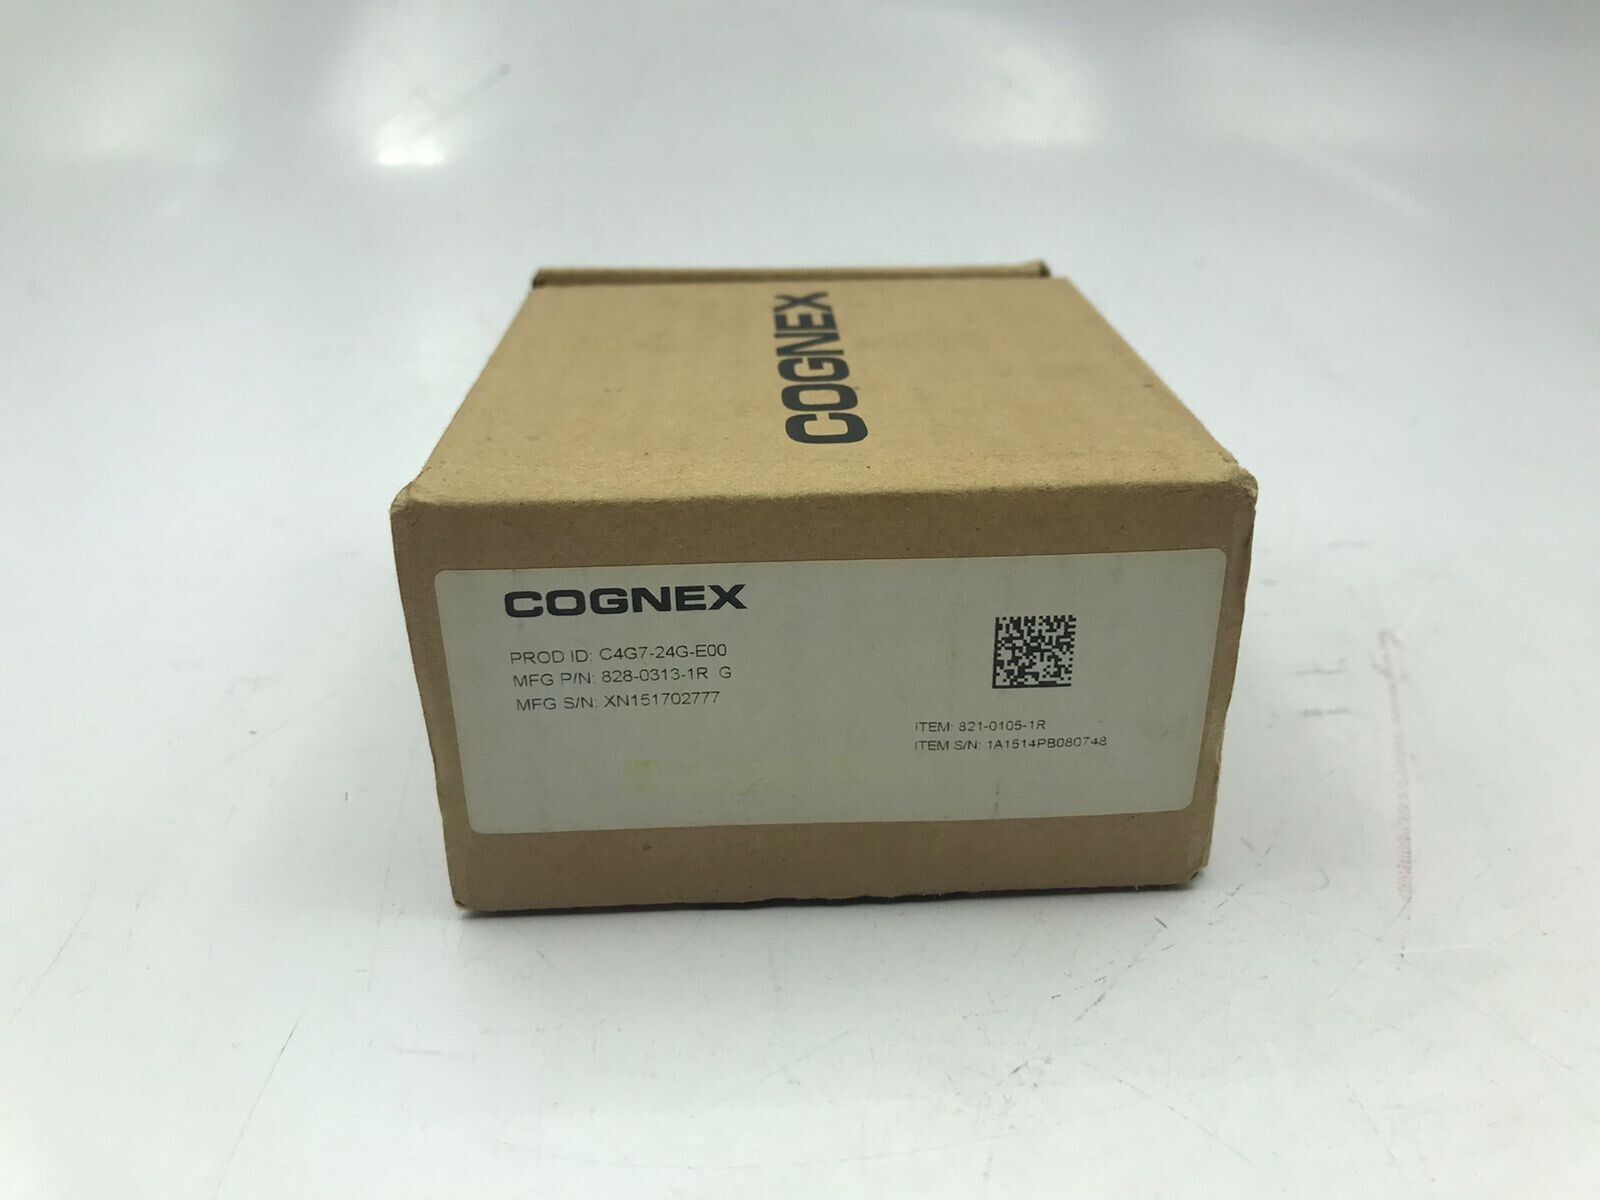 COGNEX VISION SYSTEM SENSOR 821-0105-1R NEW ONE YEAR WARRANTY FAST DELIVERY